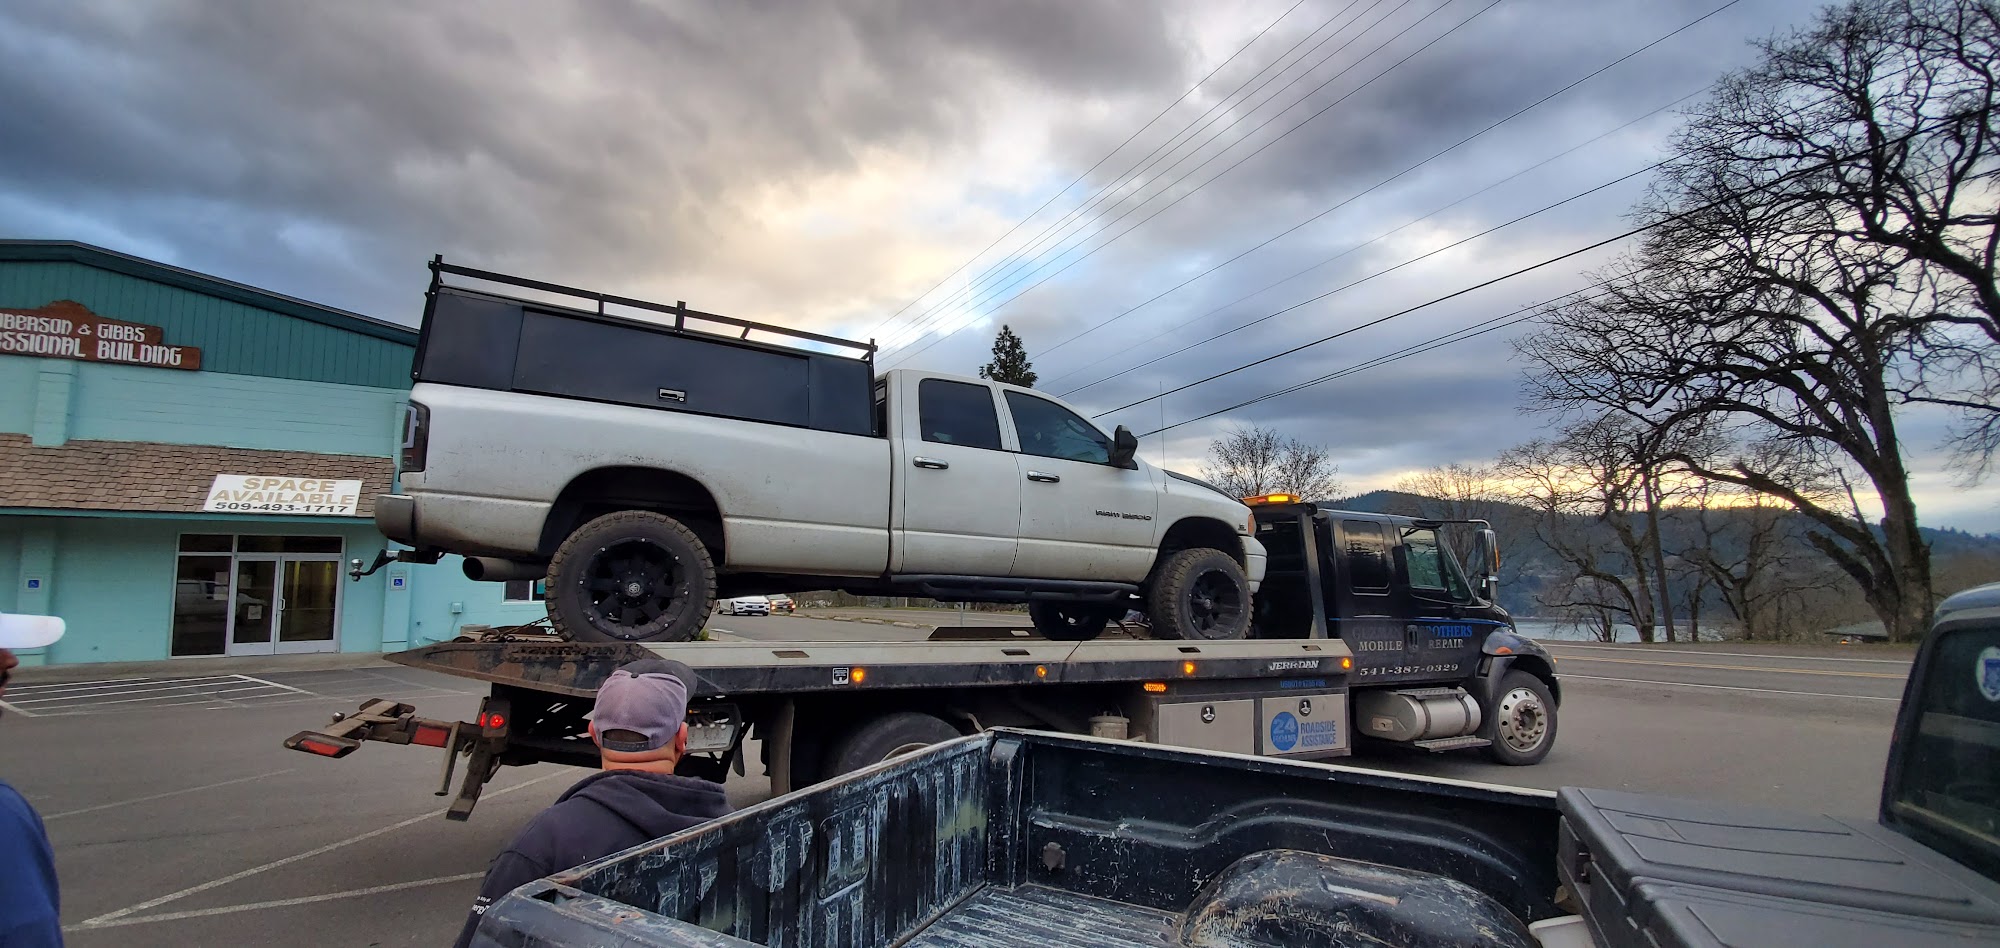 Guzman Brothers Mobile Repair and Towing